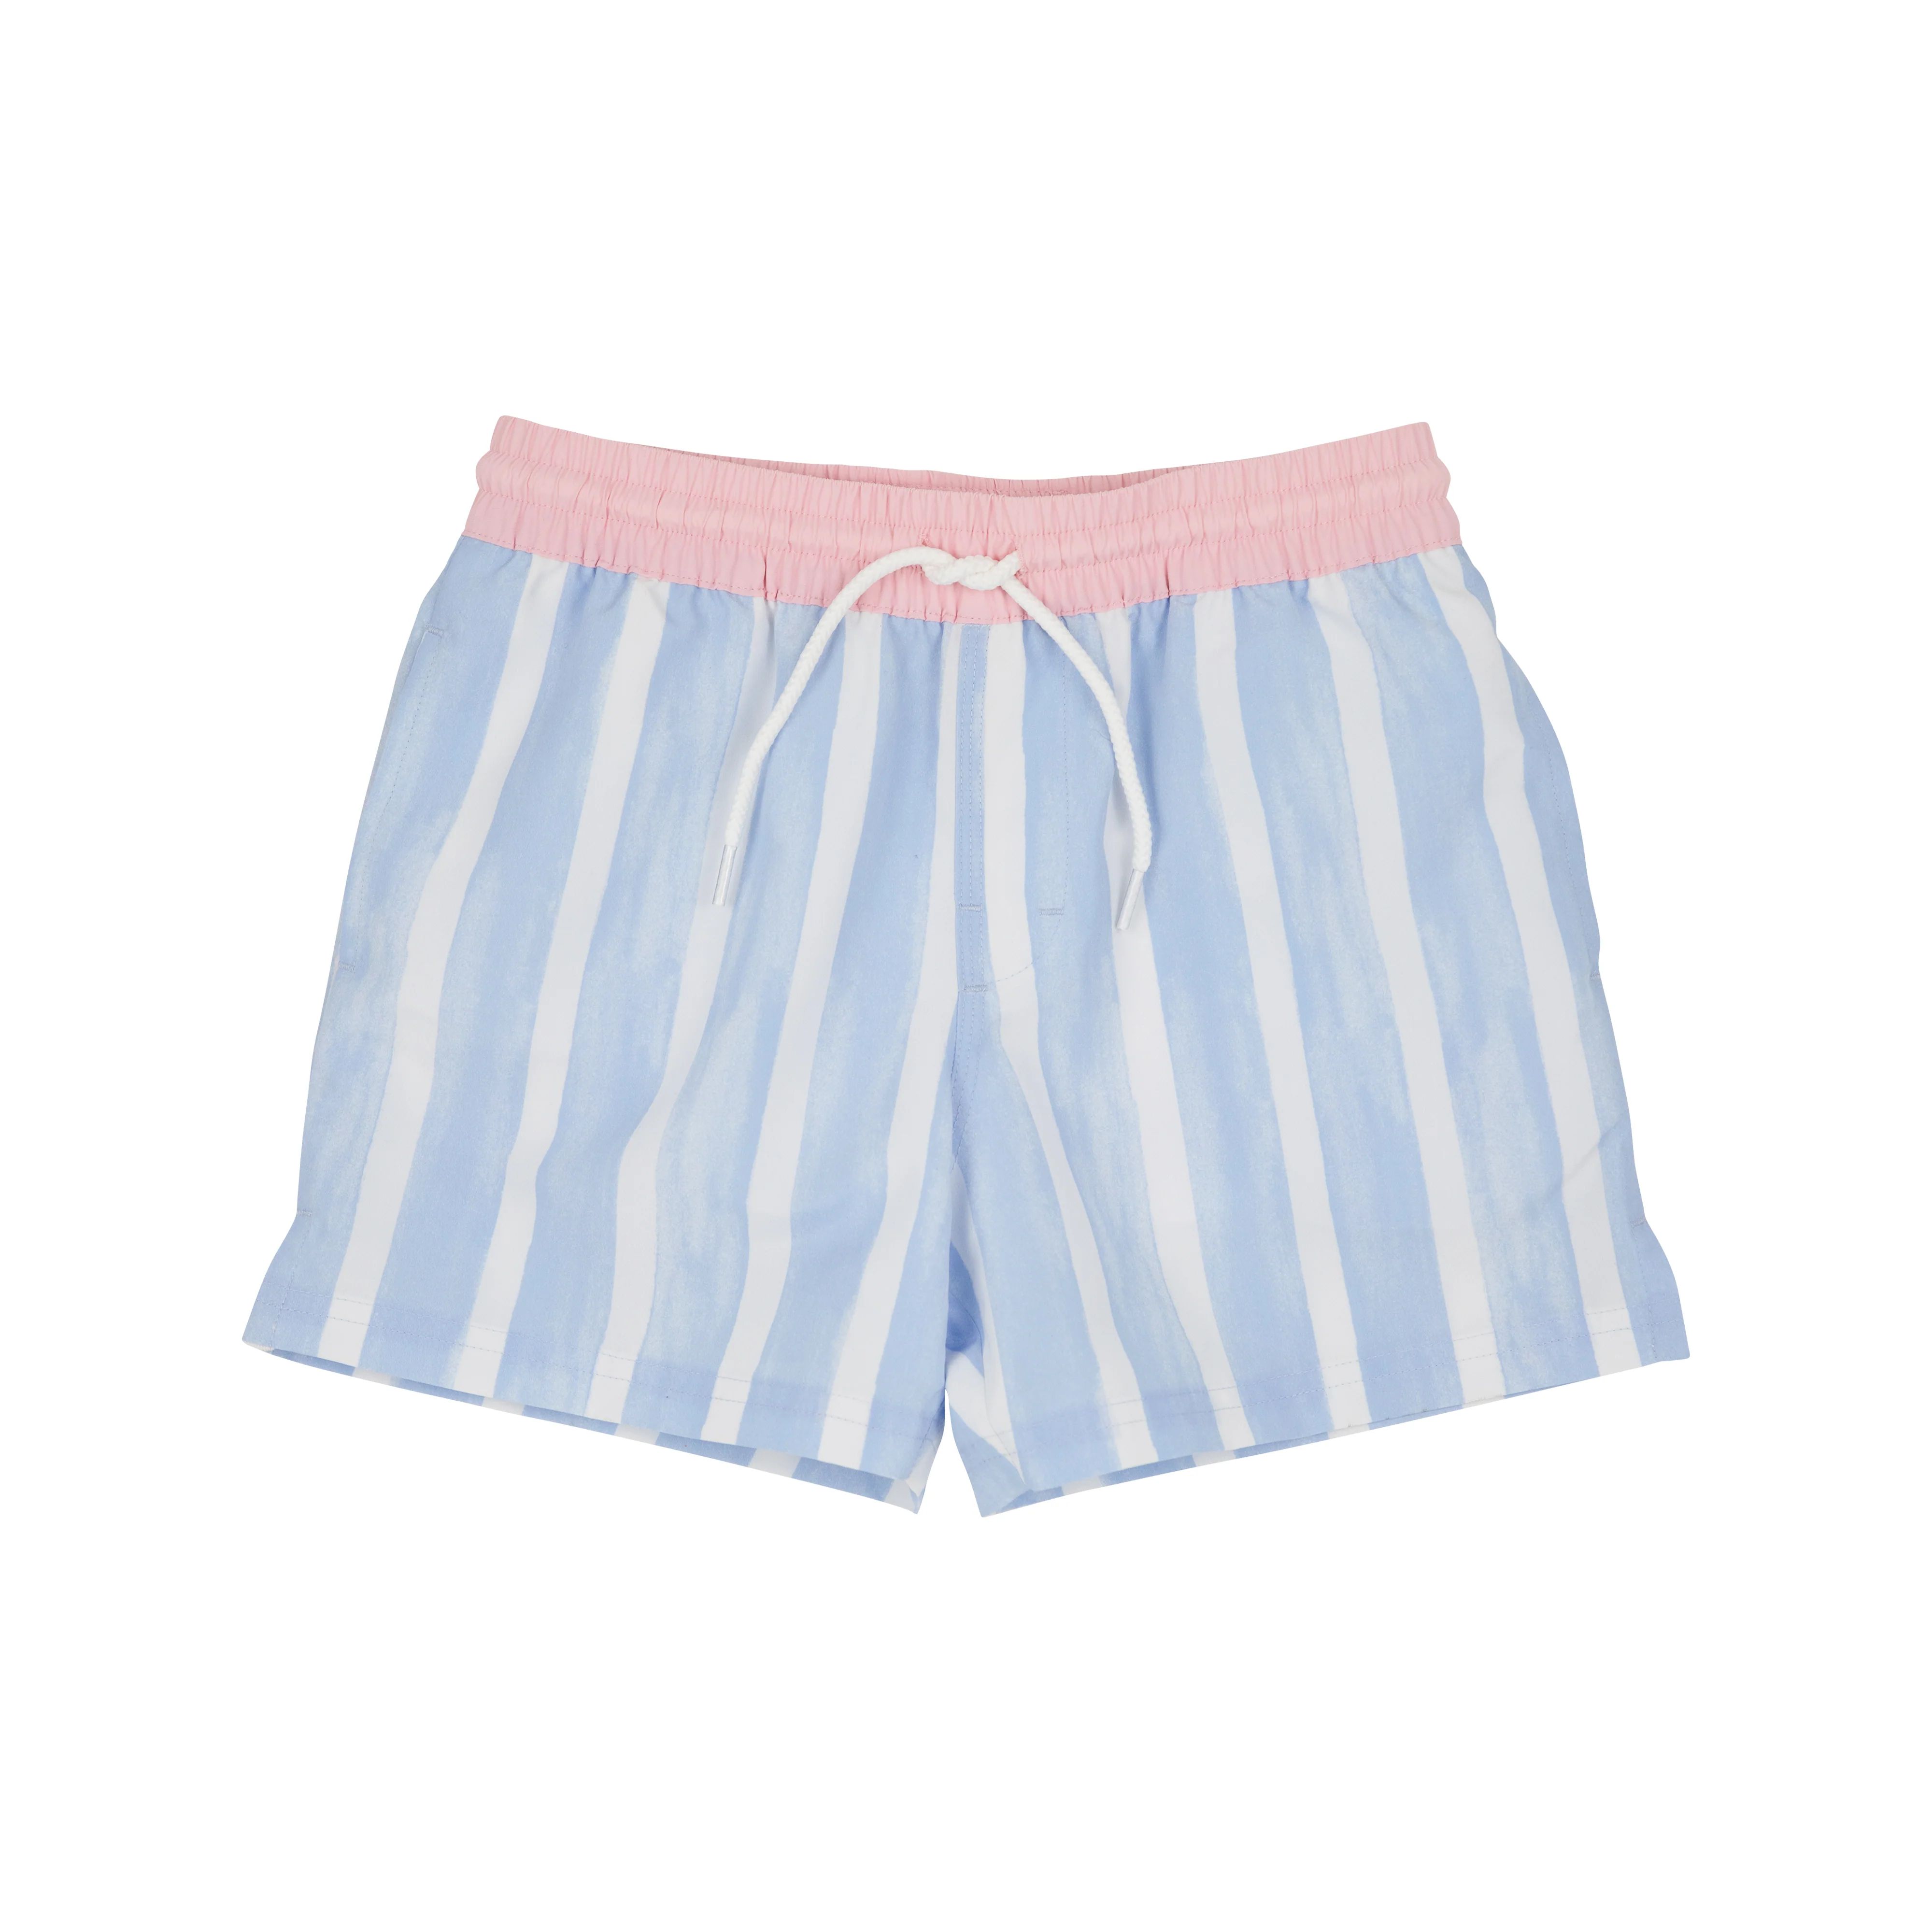 Turtle Bay Trunks - Sea Wall Stripe with Palm Beach Pink | The Beaufort Bonnet Company